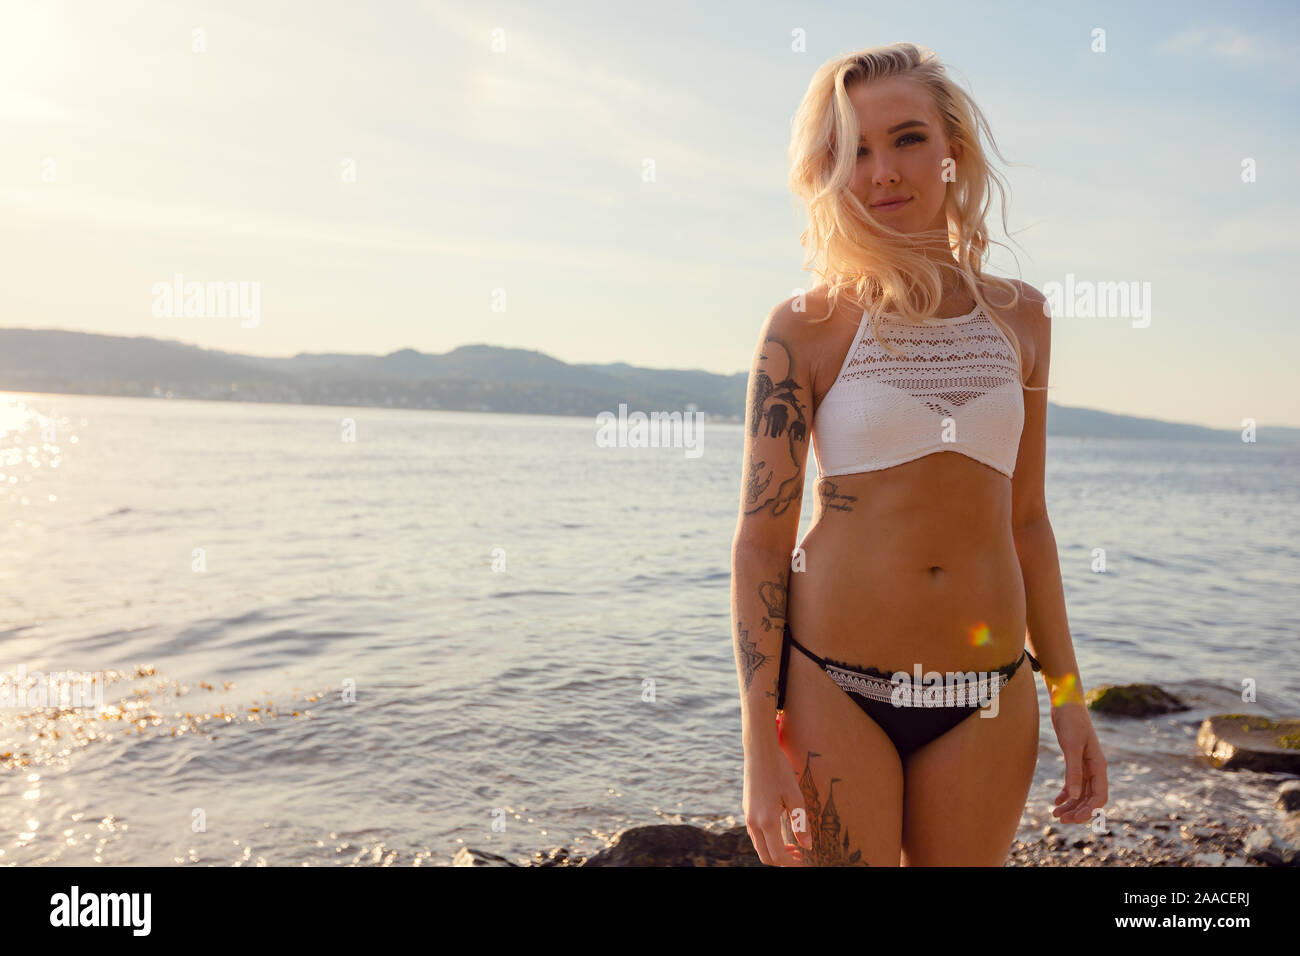 Portrait Of Beautiful Young Woman in Bikini At Beach Banque D'Images